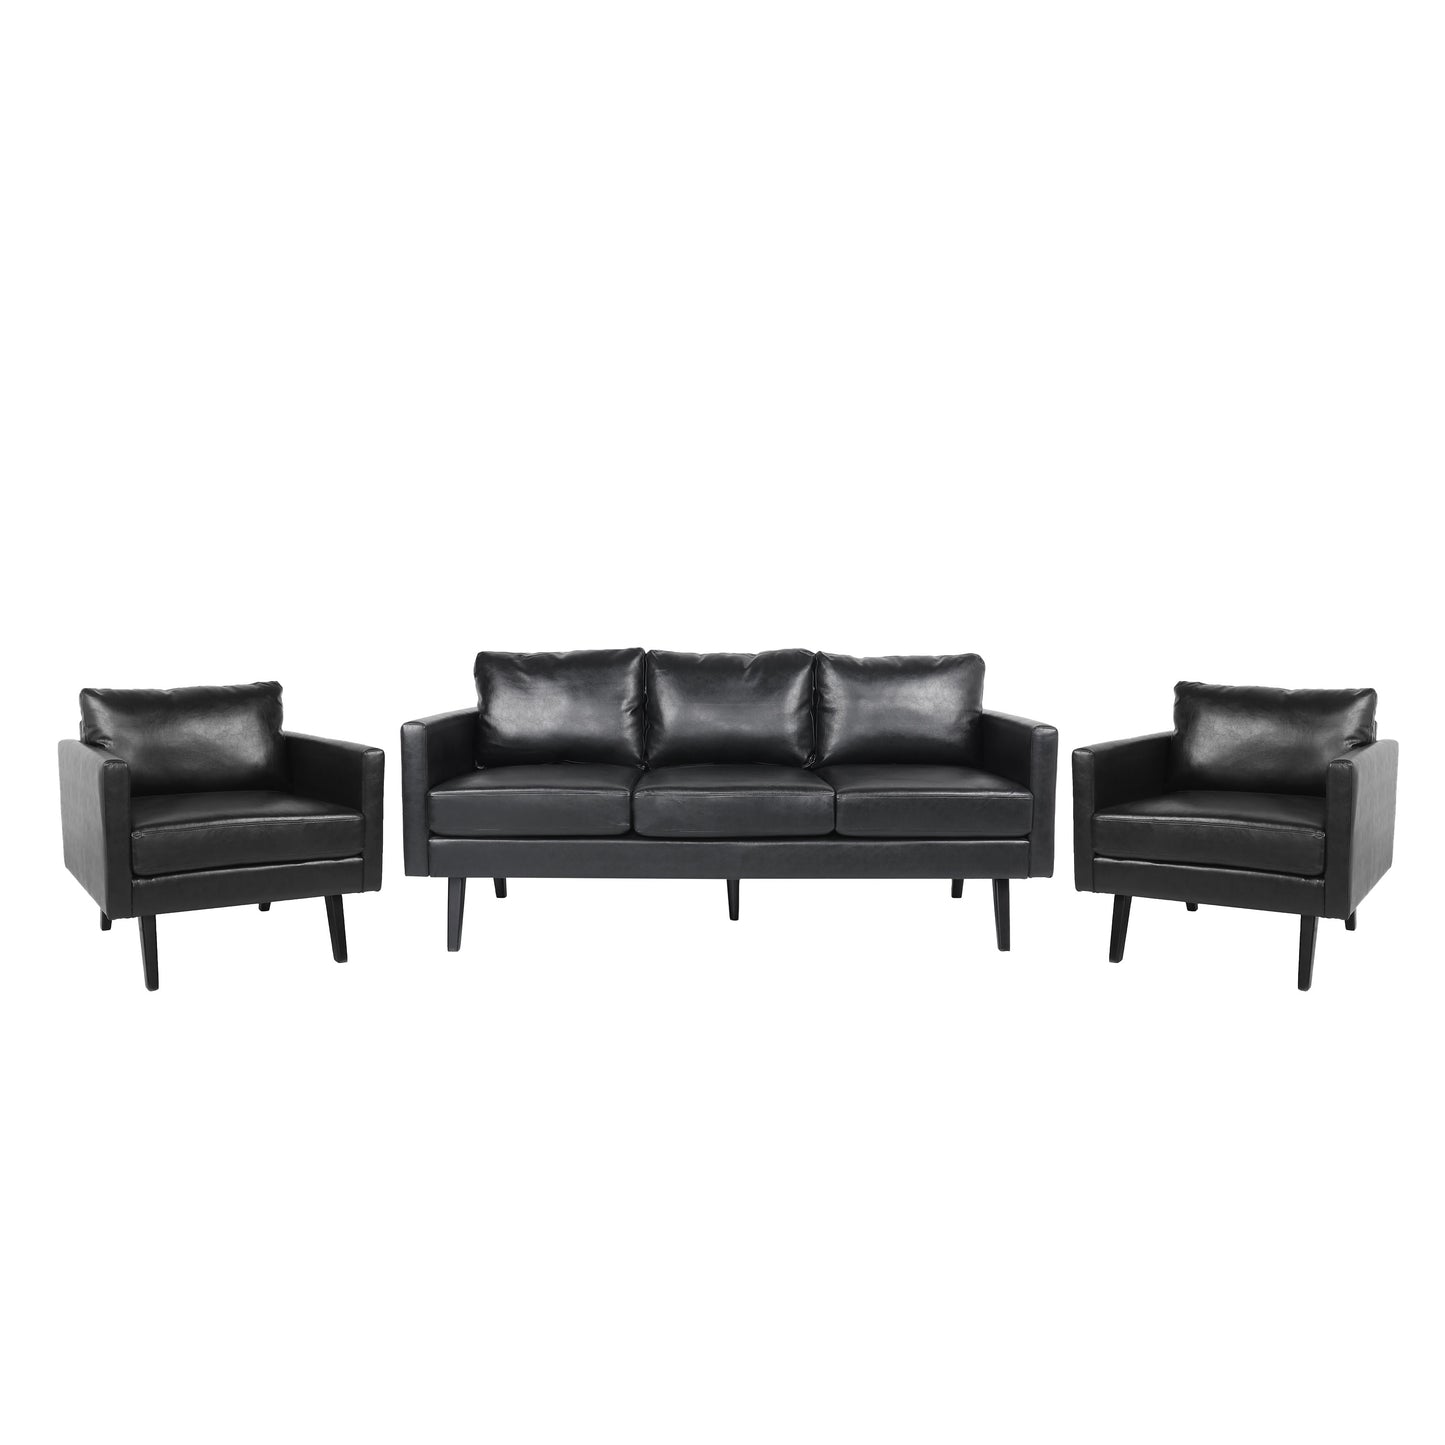 Dowd Mid Century Modern Faux Leather 3 Piece Living Room Sofa Set